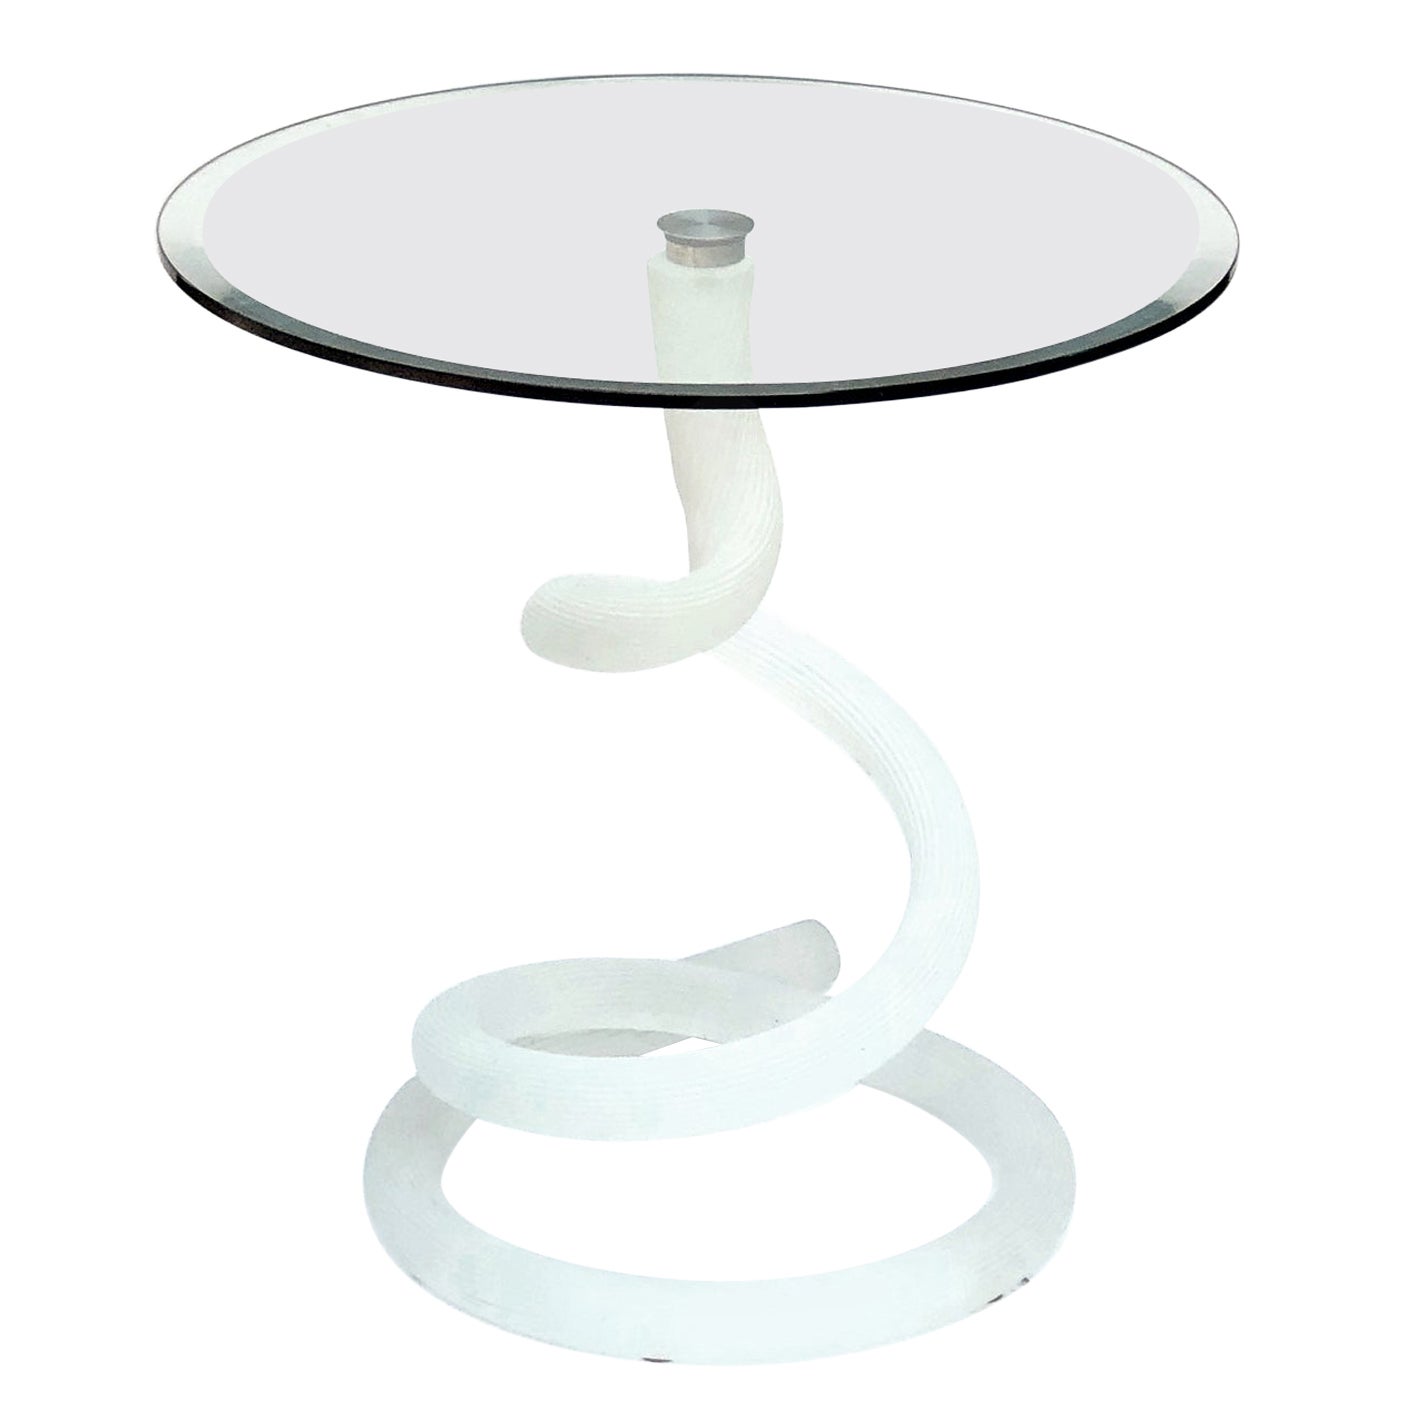 A Glass Table with Spiraling Glass Base by Italian Designer Ghibli